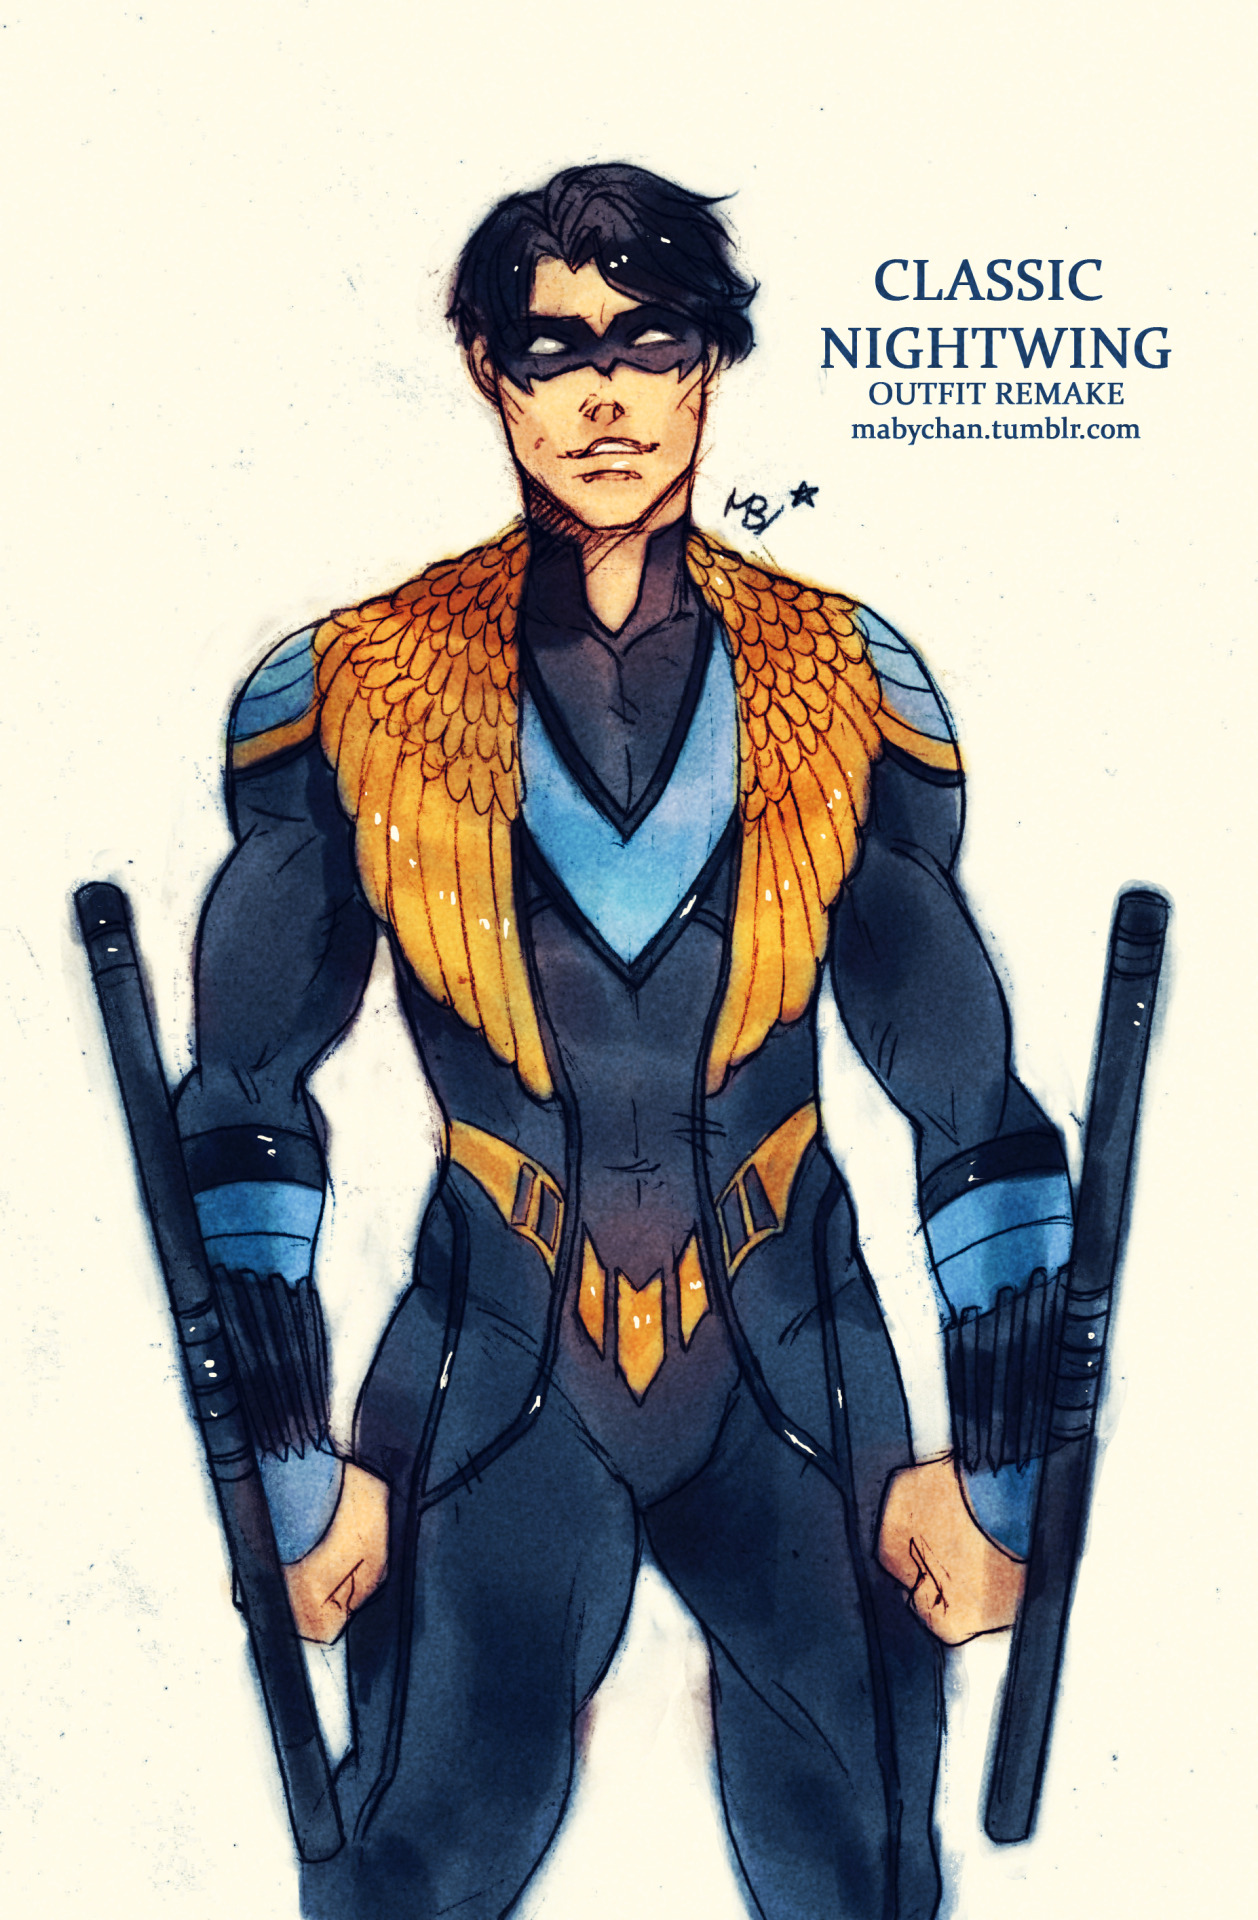 mabychan:  Outfit remake for all the Robins :D  - Dick Grayson (Nightwing)  - Jason